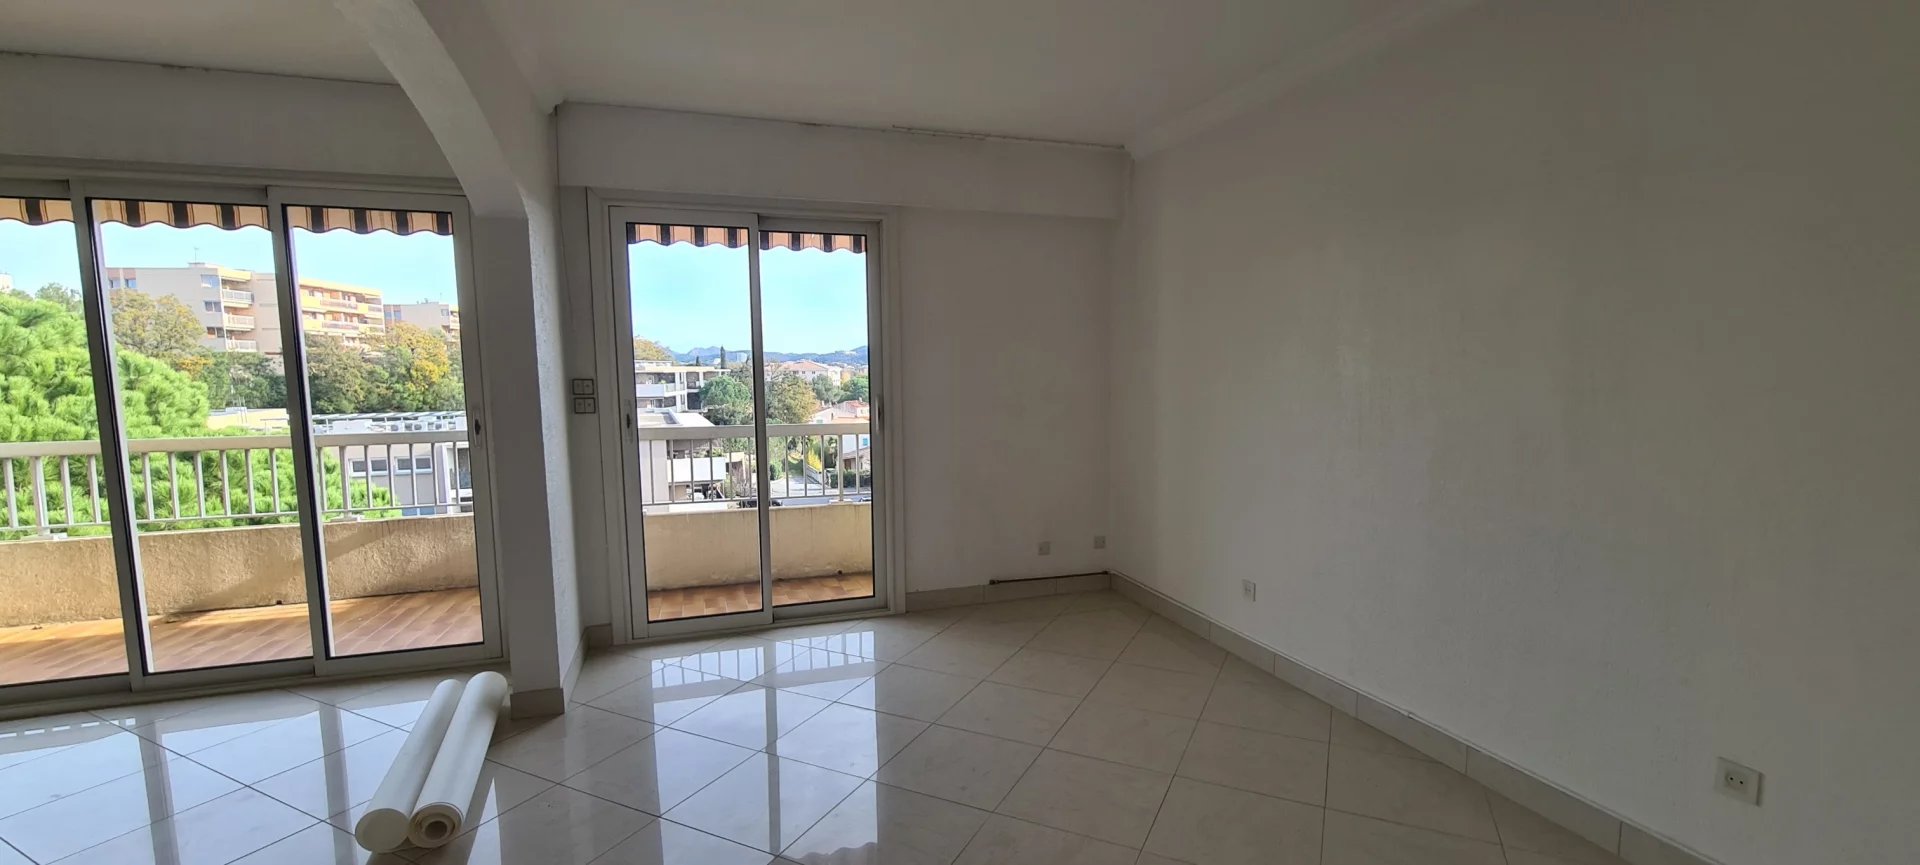 4 ROOM APARTMENT TOP FLOOR AT FREJUS, GATED RESIDENCE CLOSE TI THE CITY CENTRE